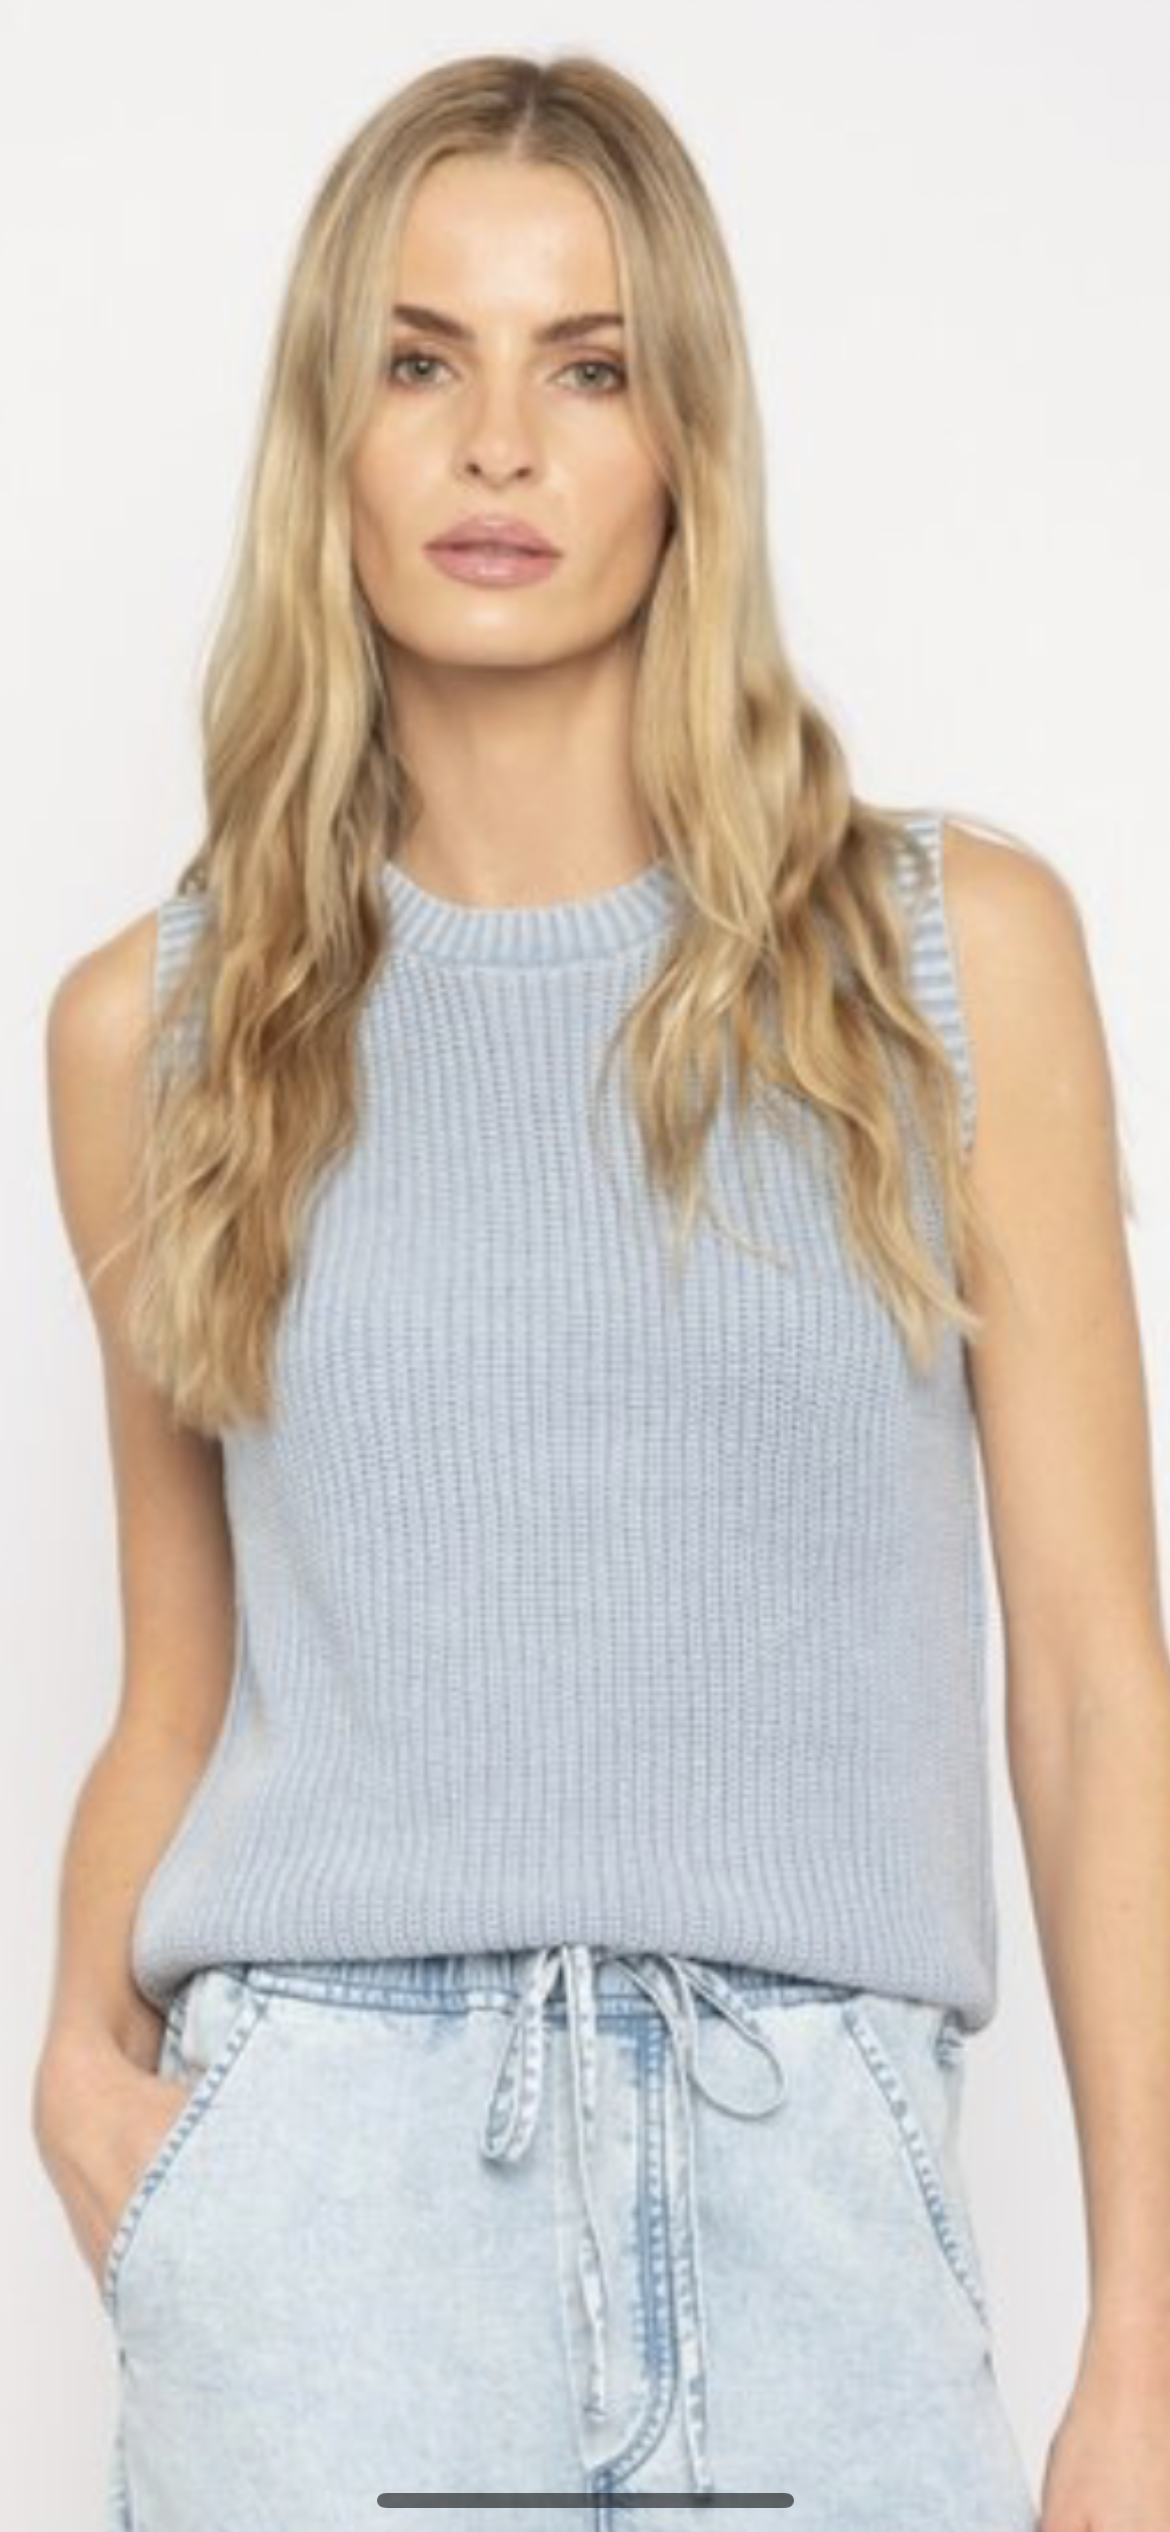 CENTRAL PARK WEST- Bella Shell Sweater Blue